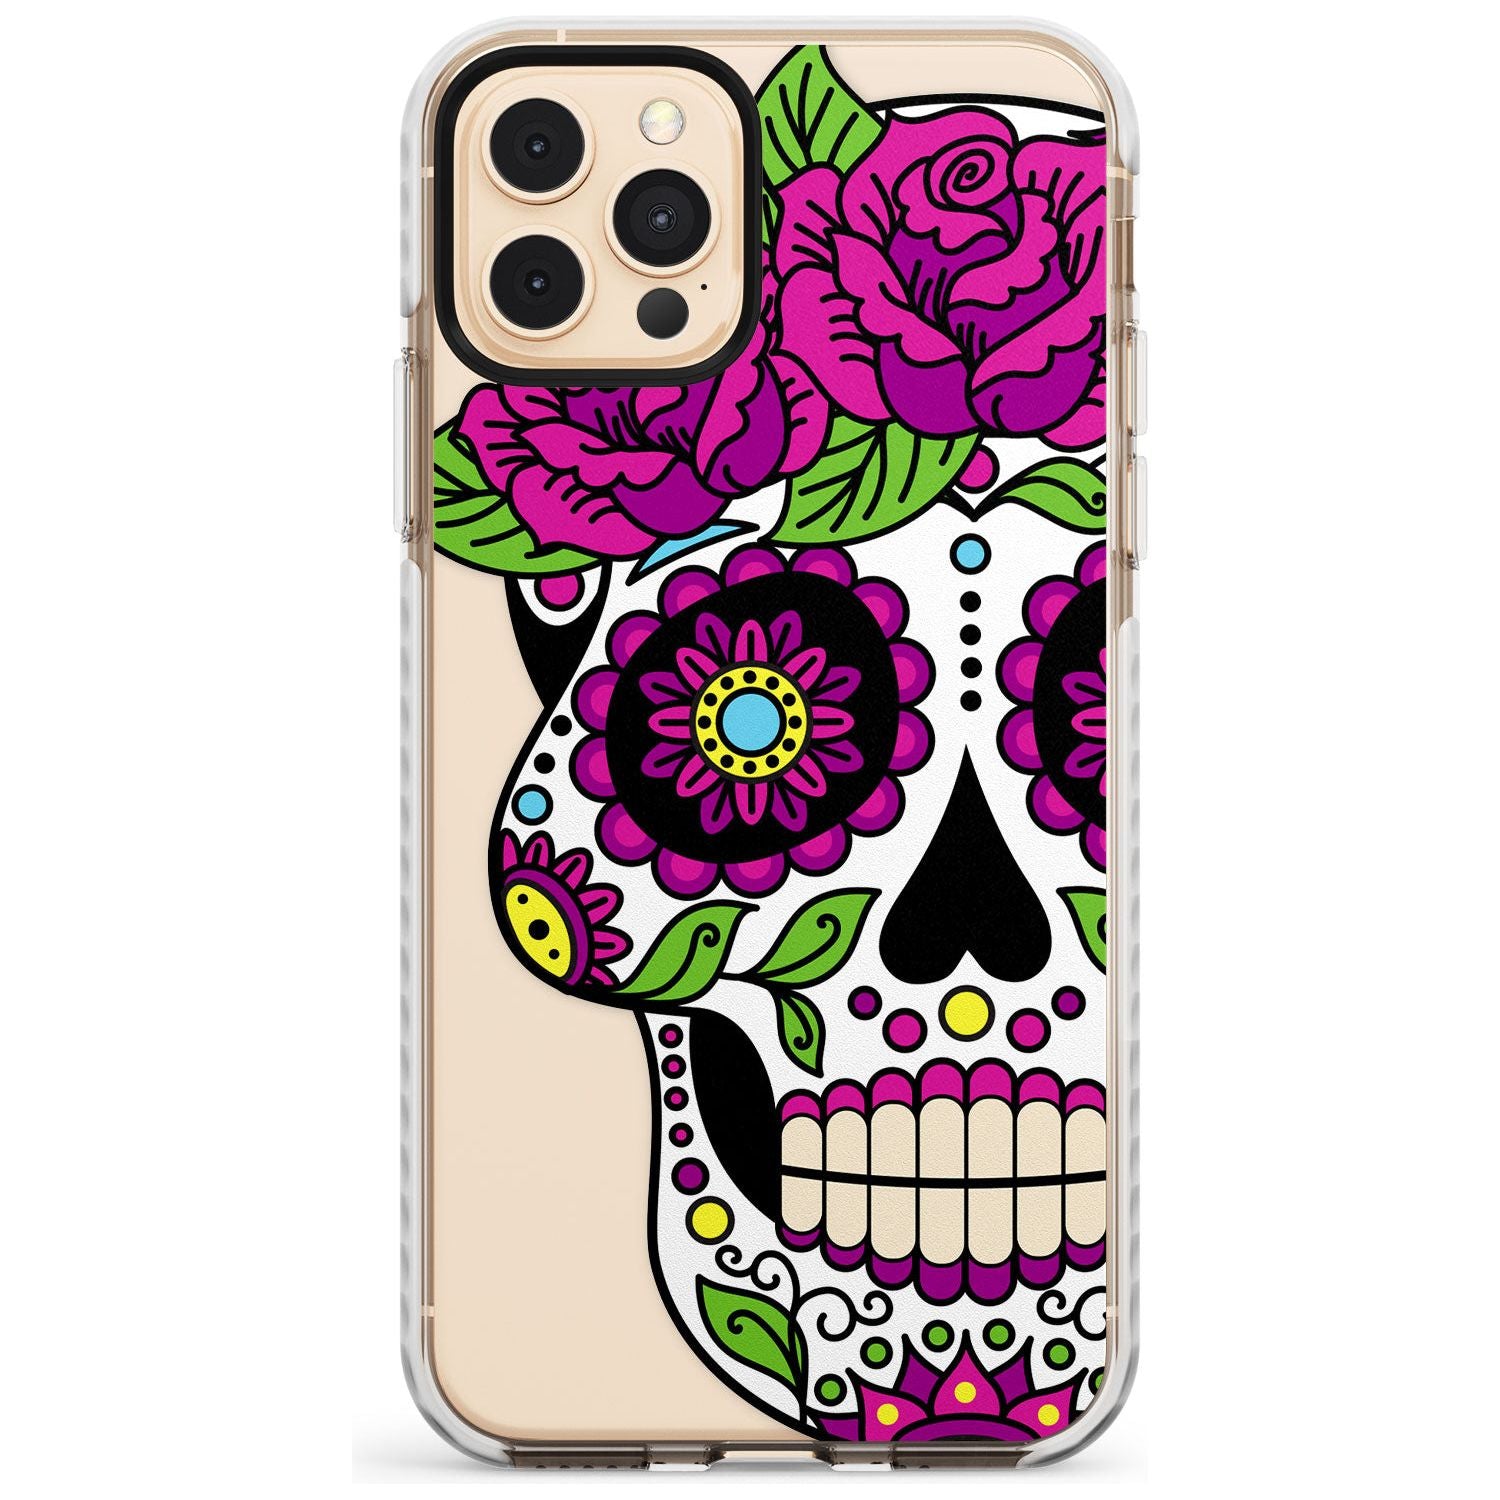 Purple Floral Sugar Skull Impact Phone Case for iPhone 11 Pro Max